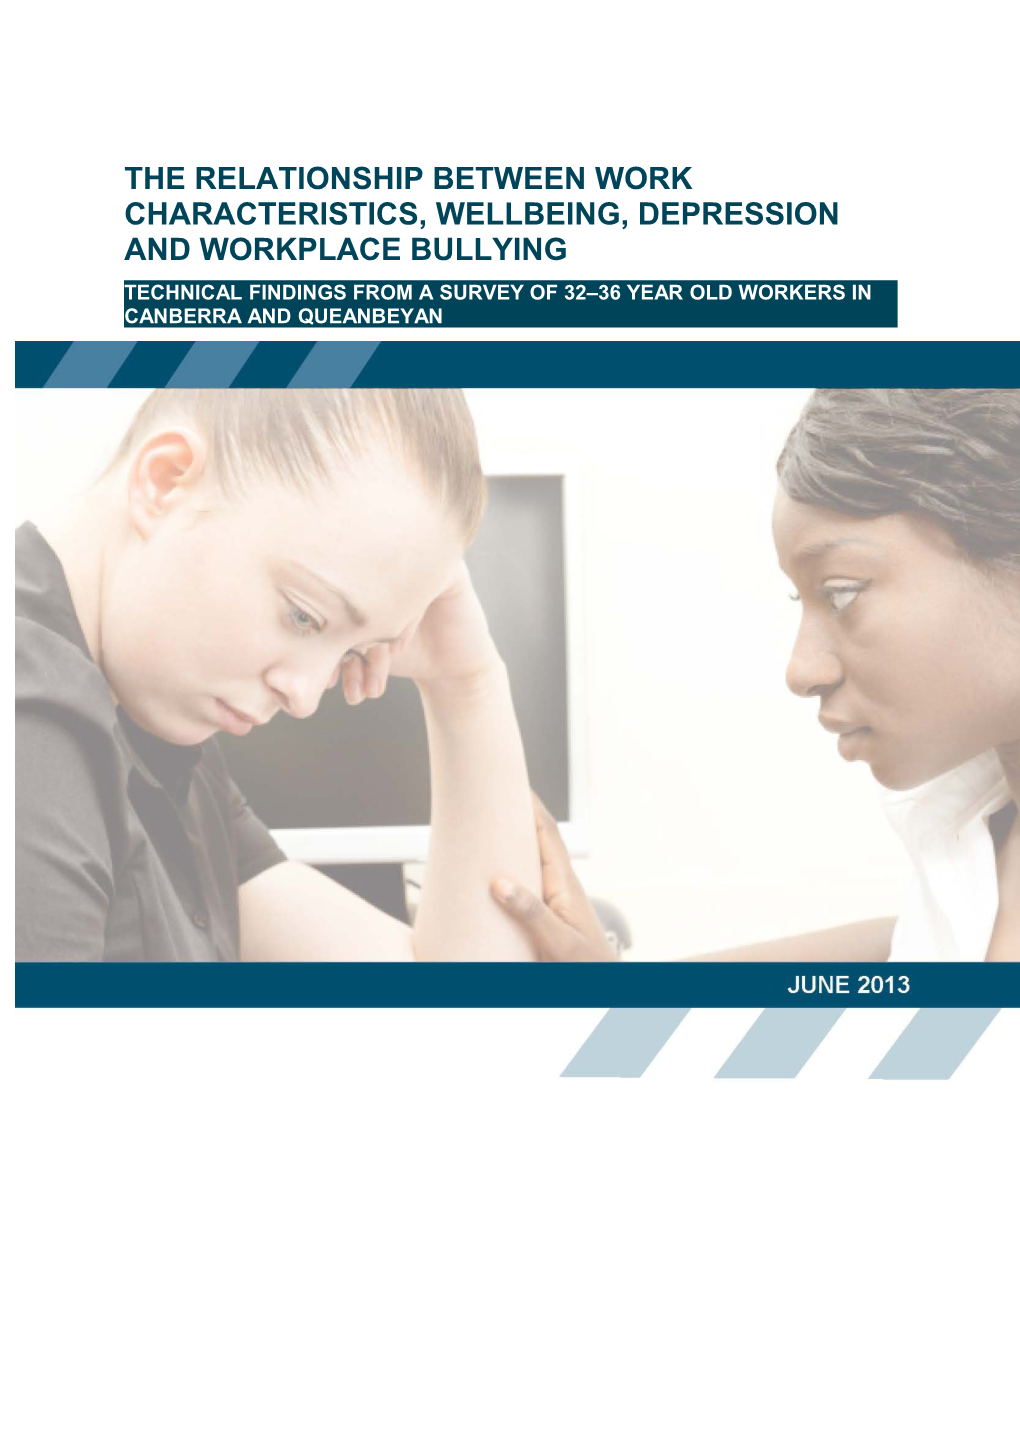 The Relationship Between Work Characteristics, Wellbeing, Depression and Workplace Bullying